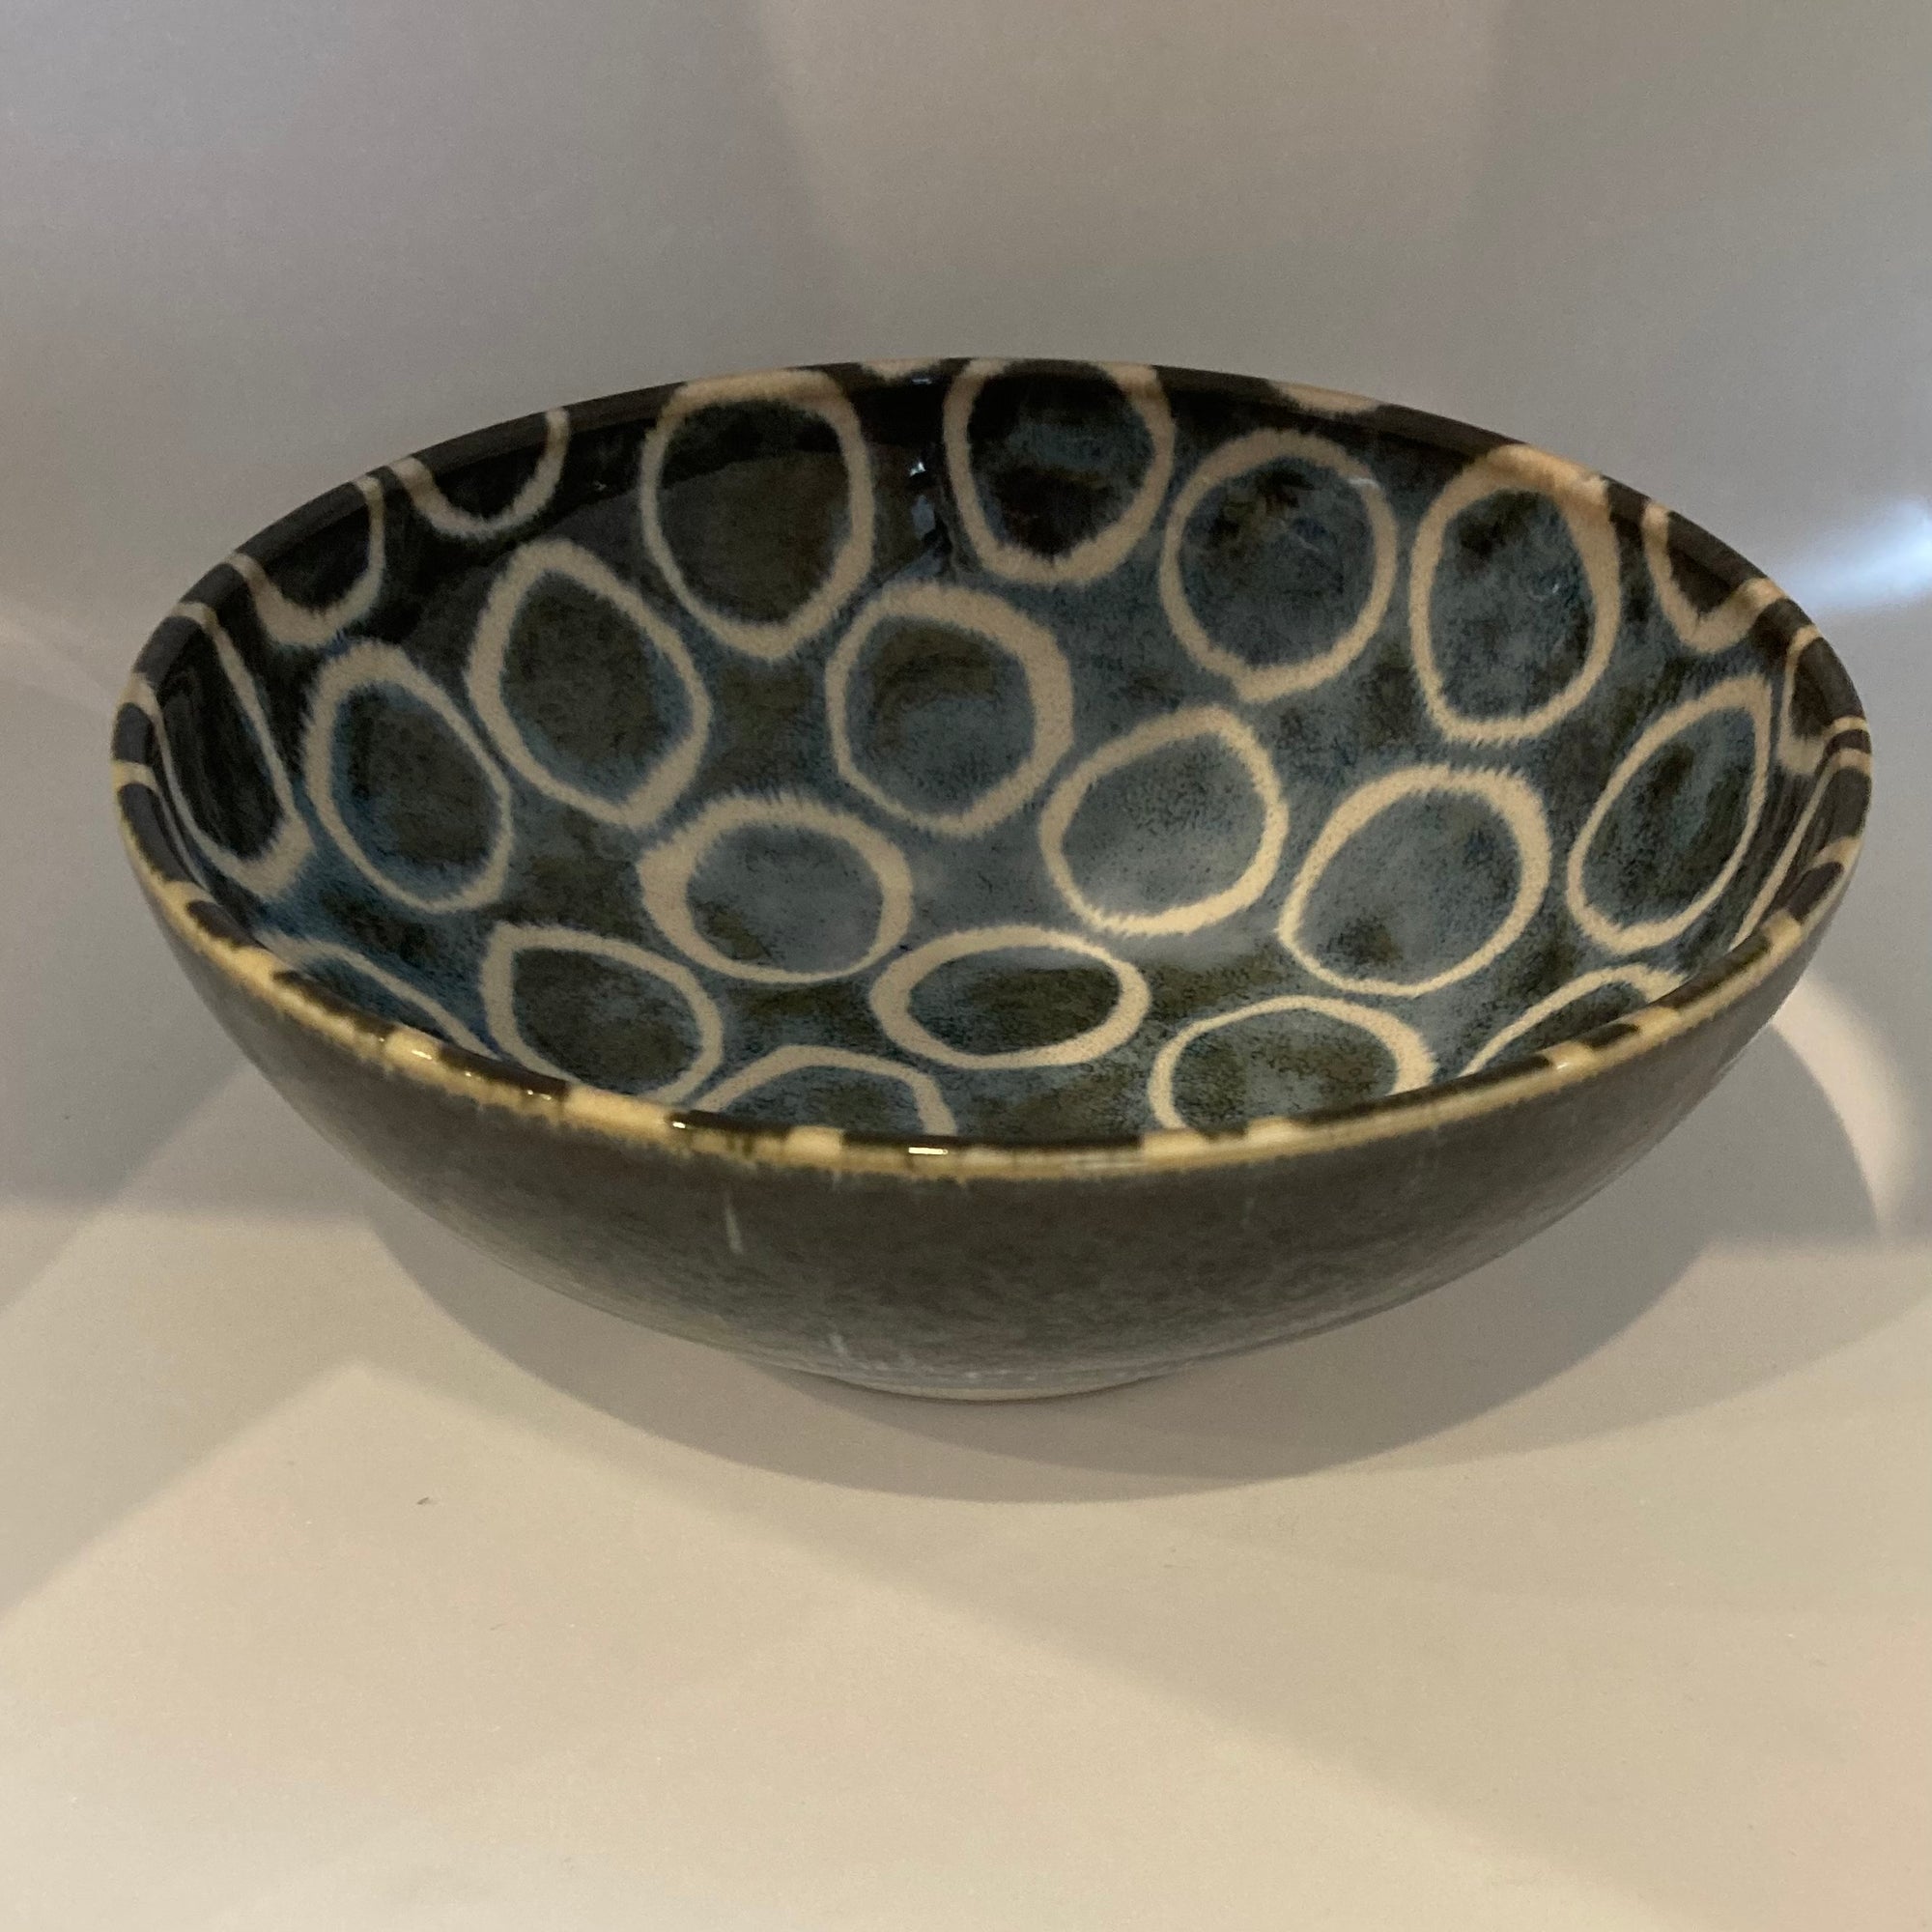 acob Little-Dulwich Hill-Momo Bowl-Japanese-Blue and Green Glaze